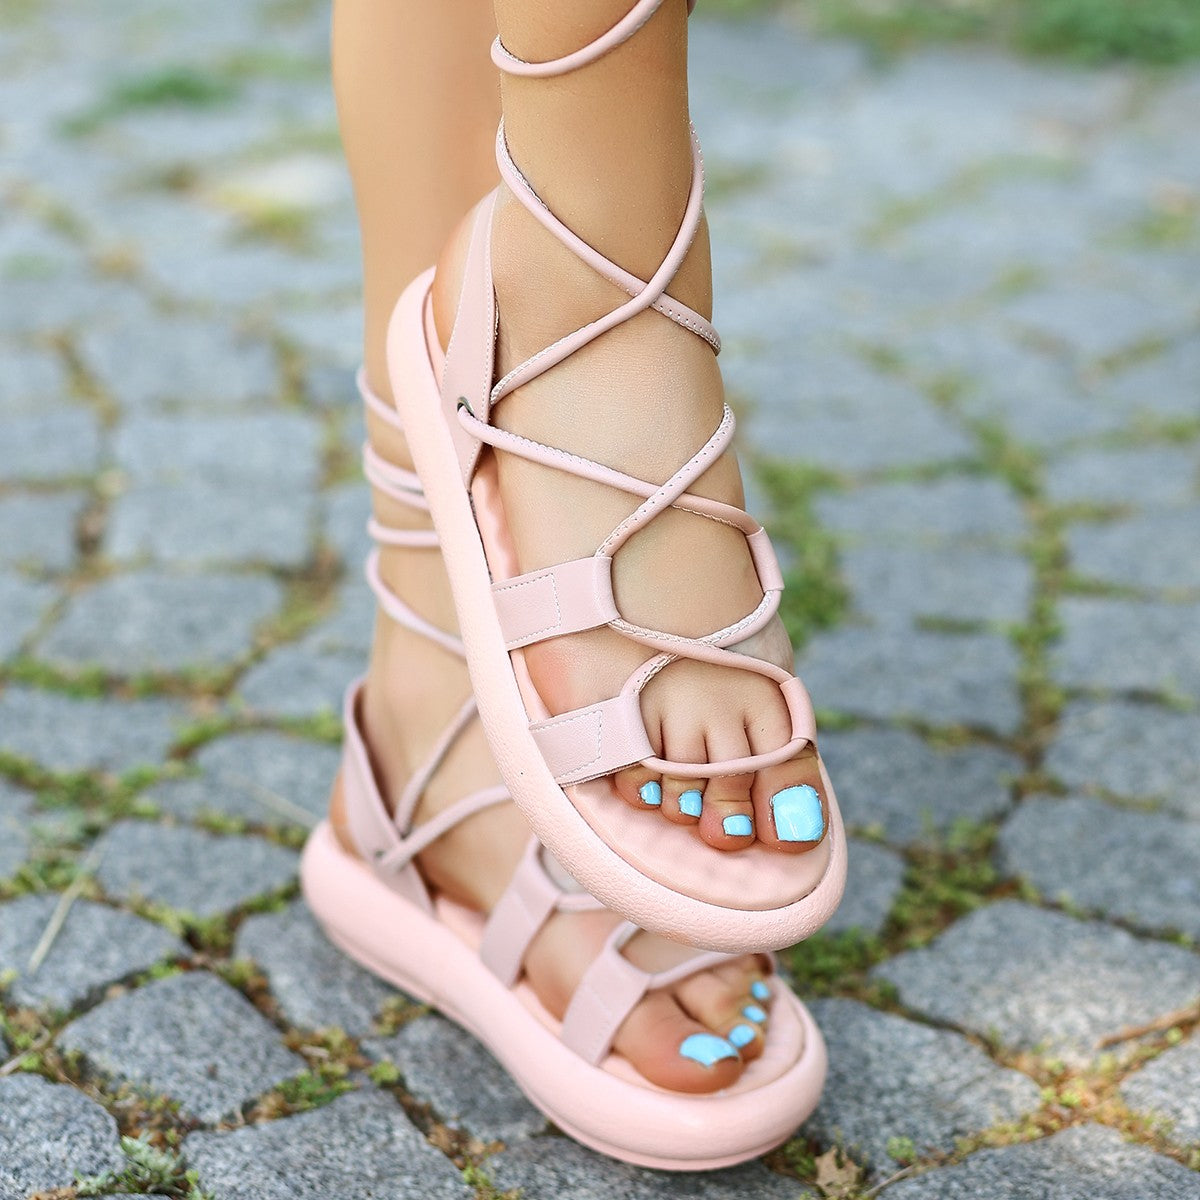 Women's Saby Powder Skin Lace-up Sandals - STREETMODE ™